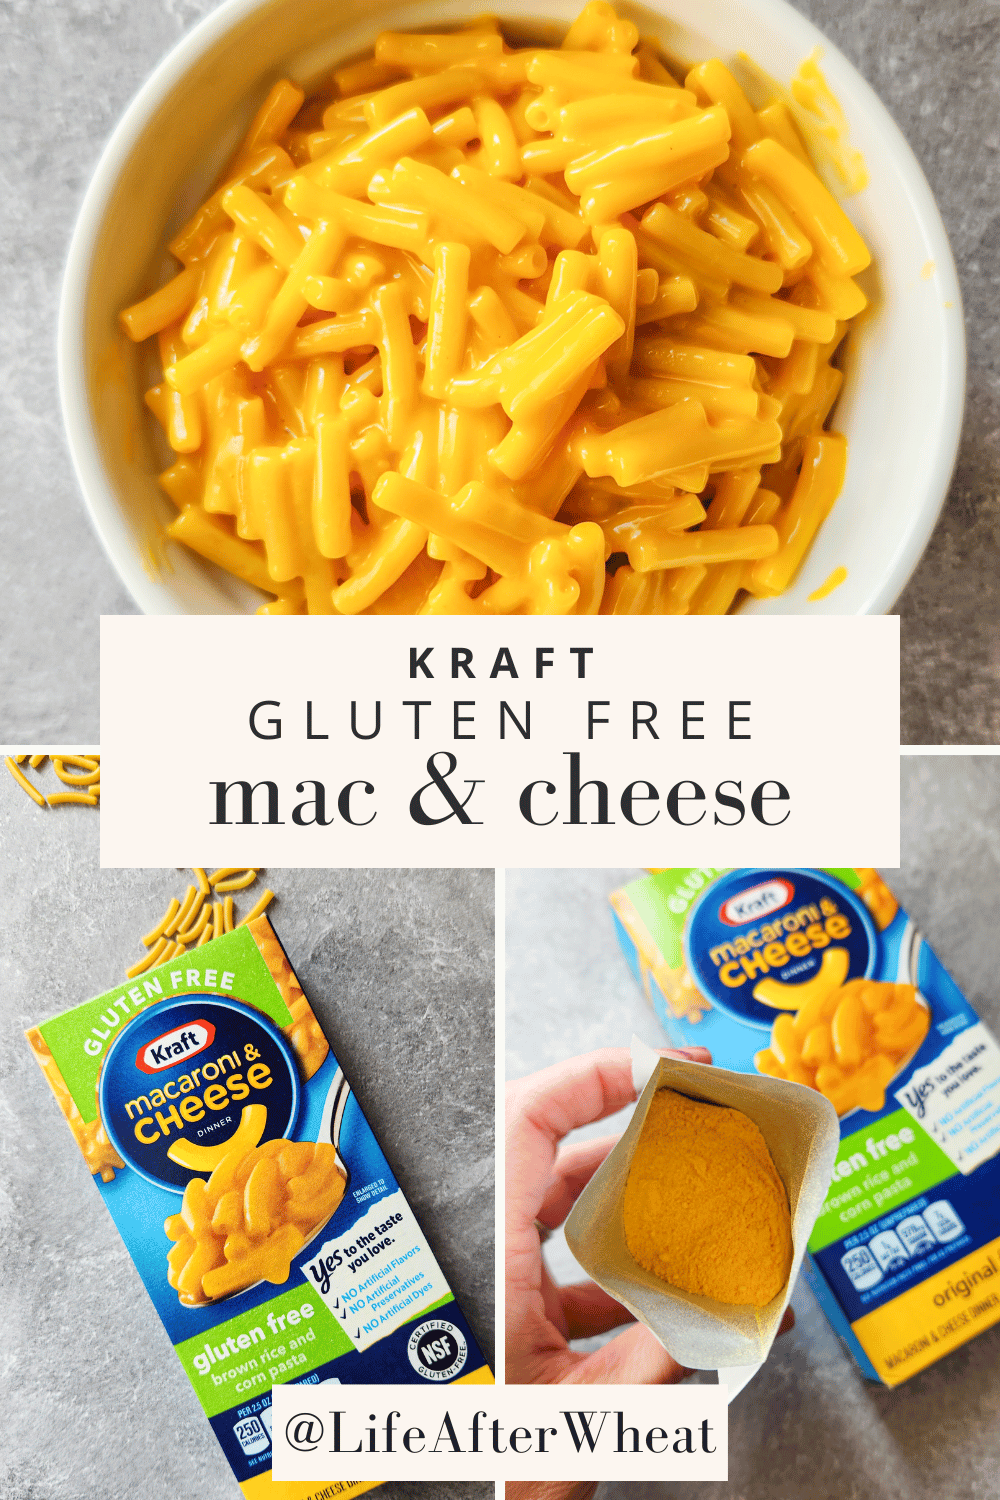 Original Mac & Cheese Macaroni and Cheese Dinner with Whole Grain Pasta -  Products - Kraft Mac & Cheese